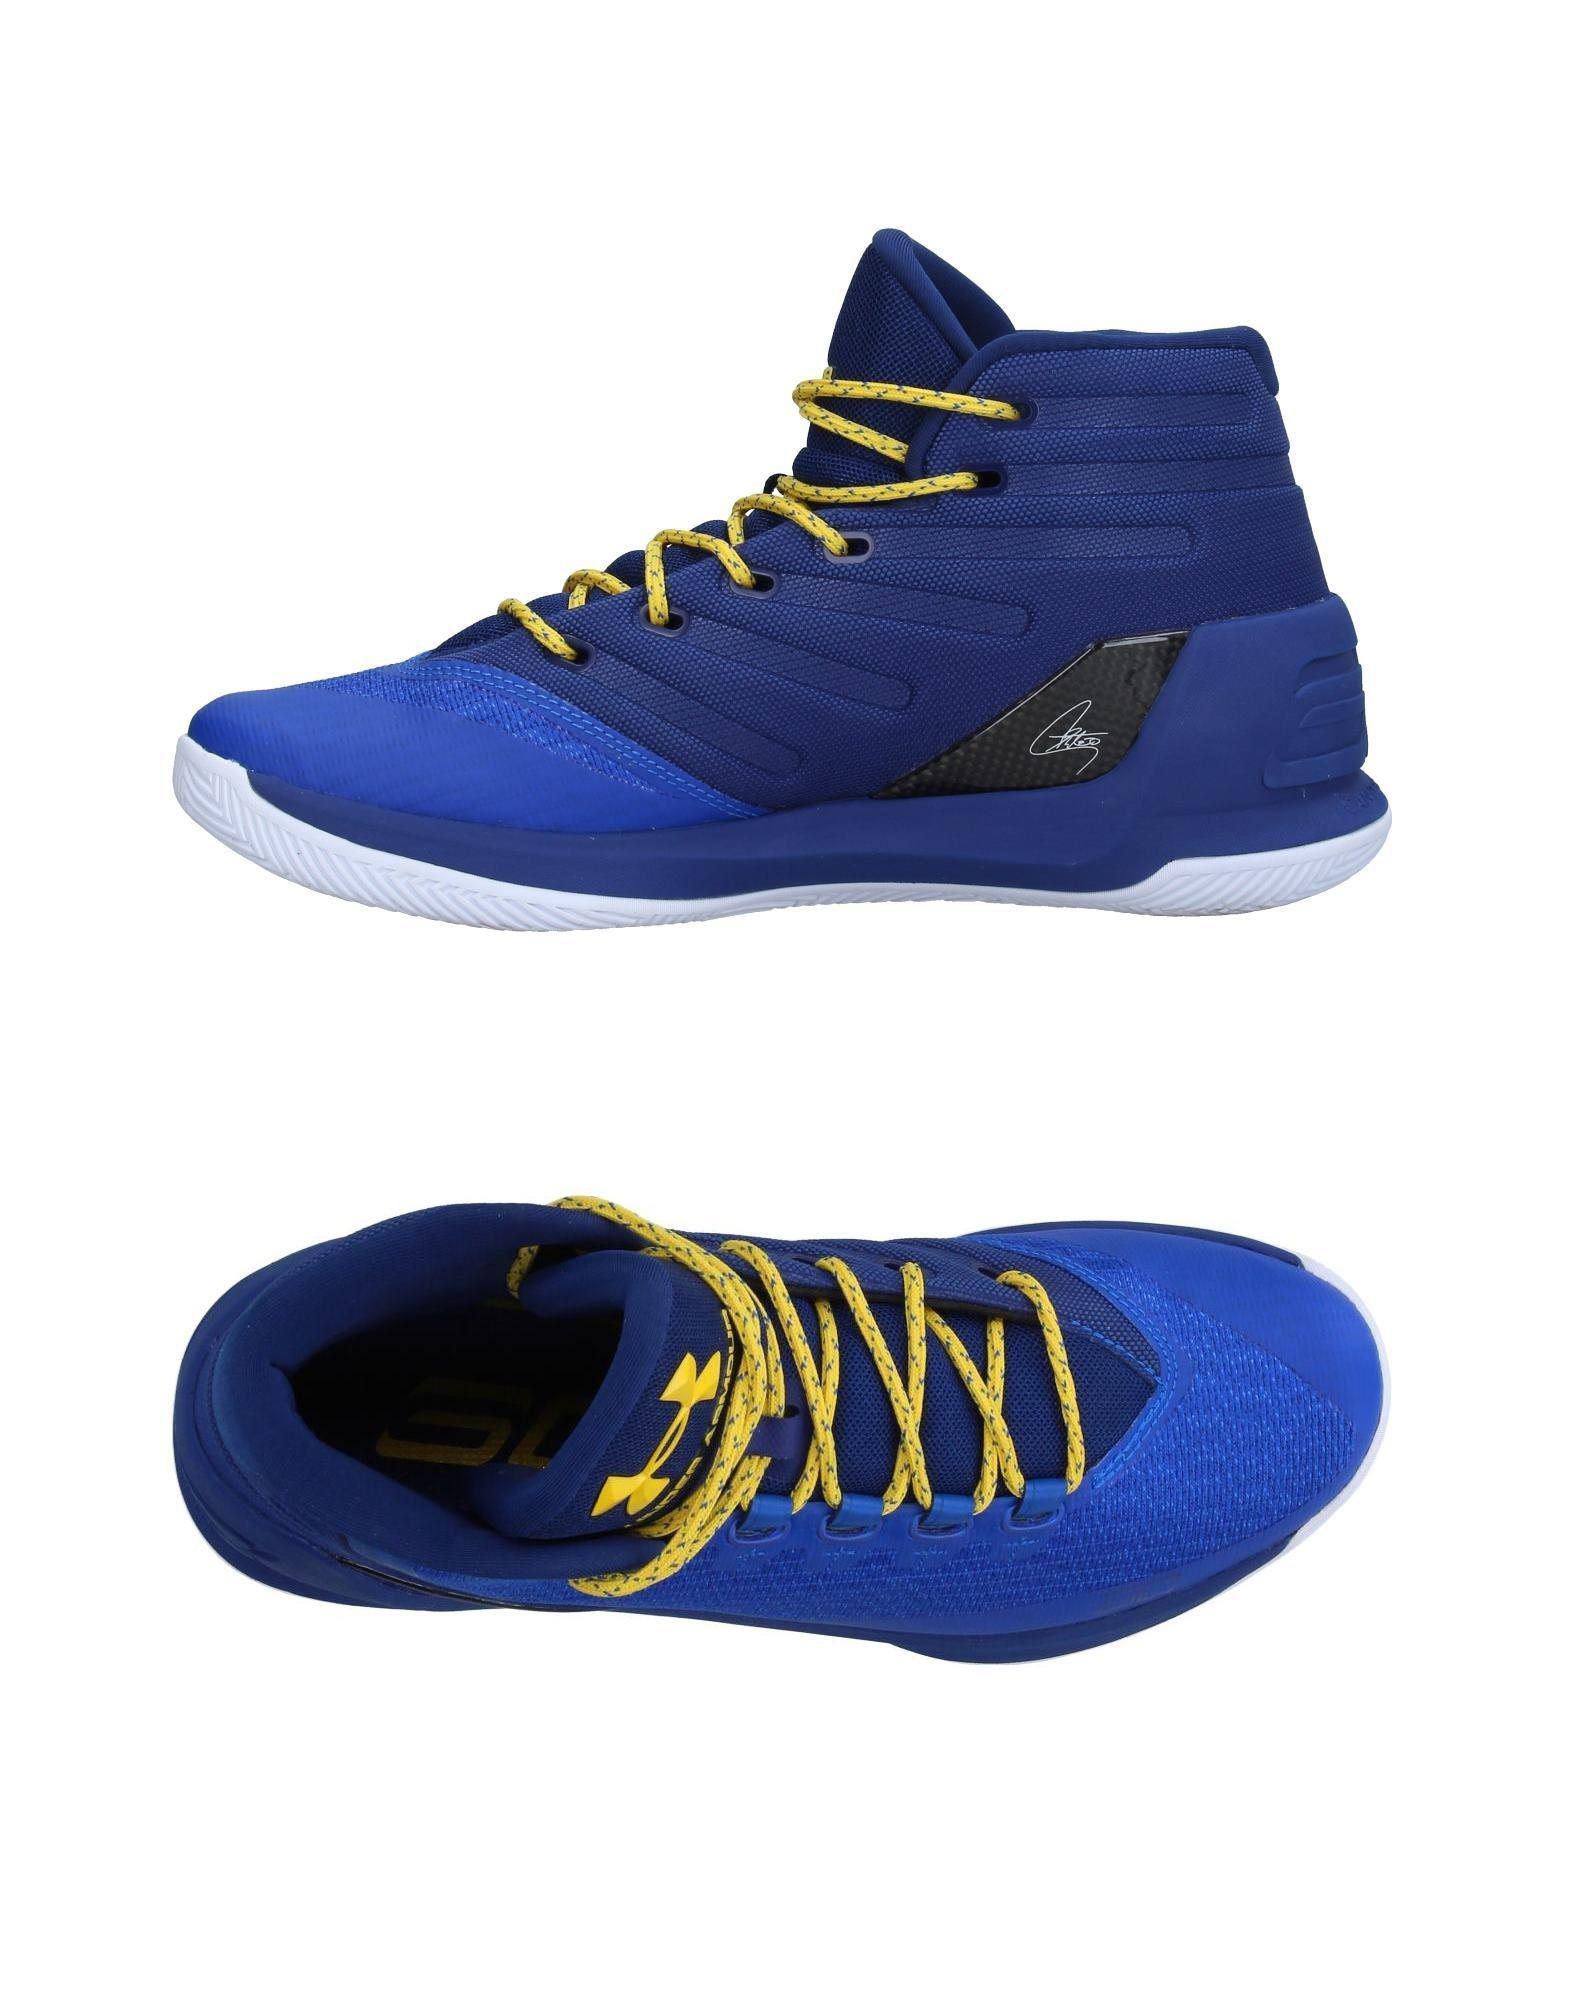 Under Armour High-tops & Sneakers in Blue for Men - Lyst